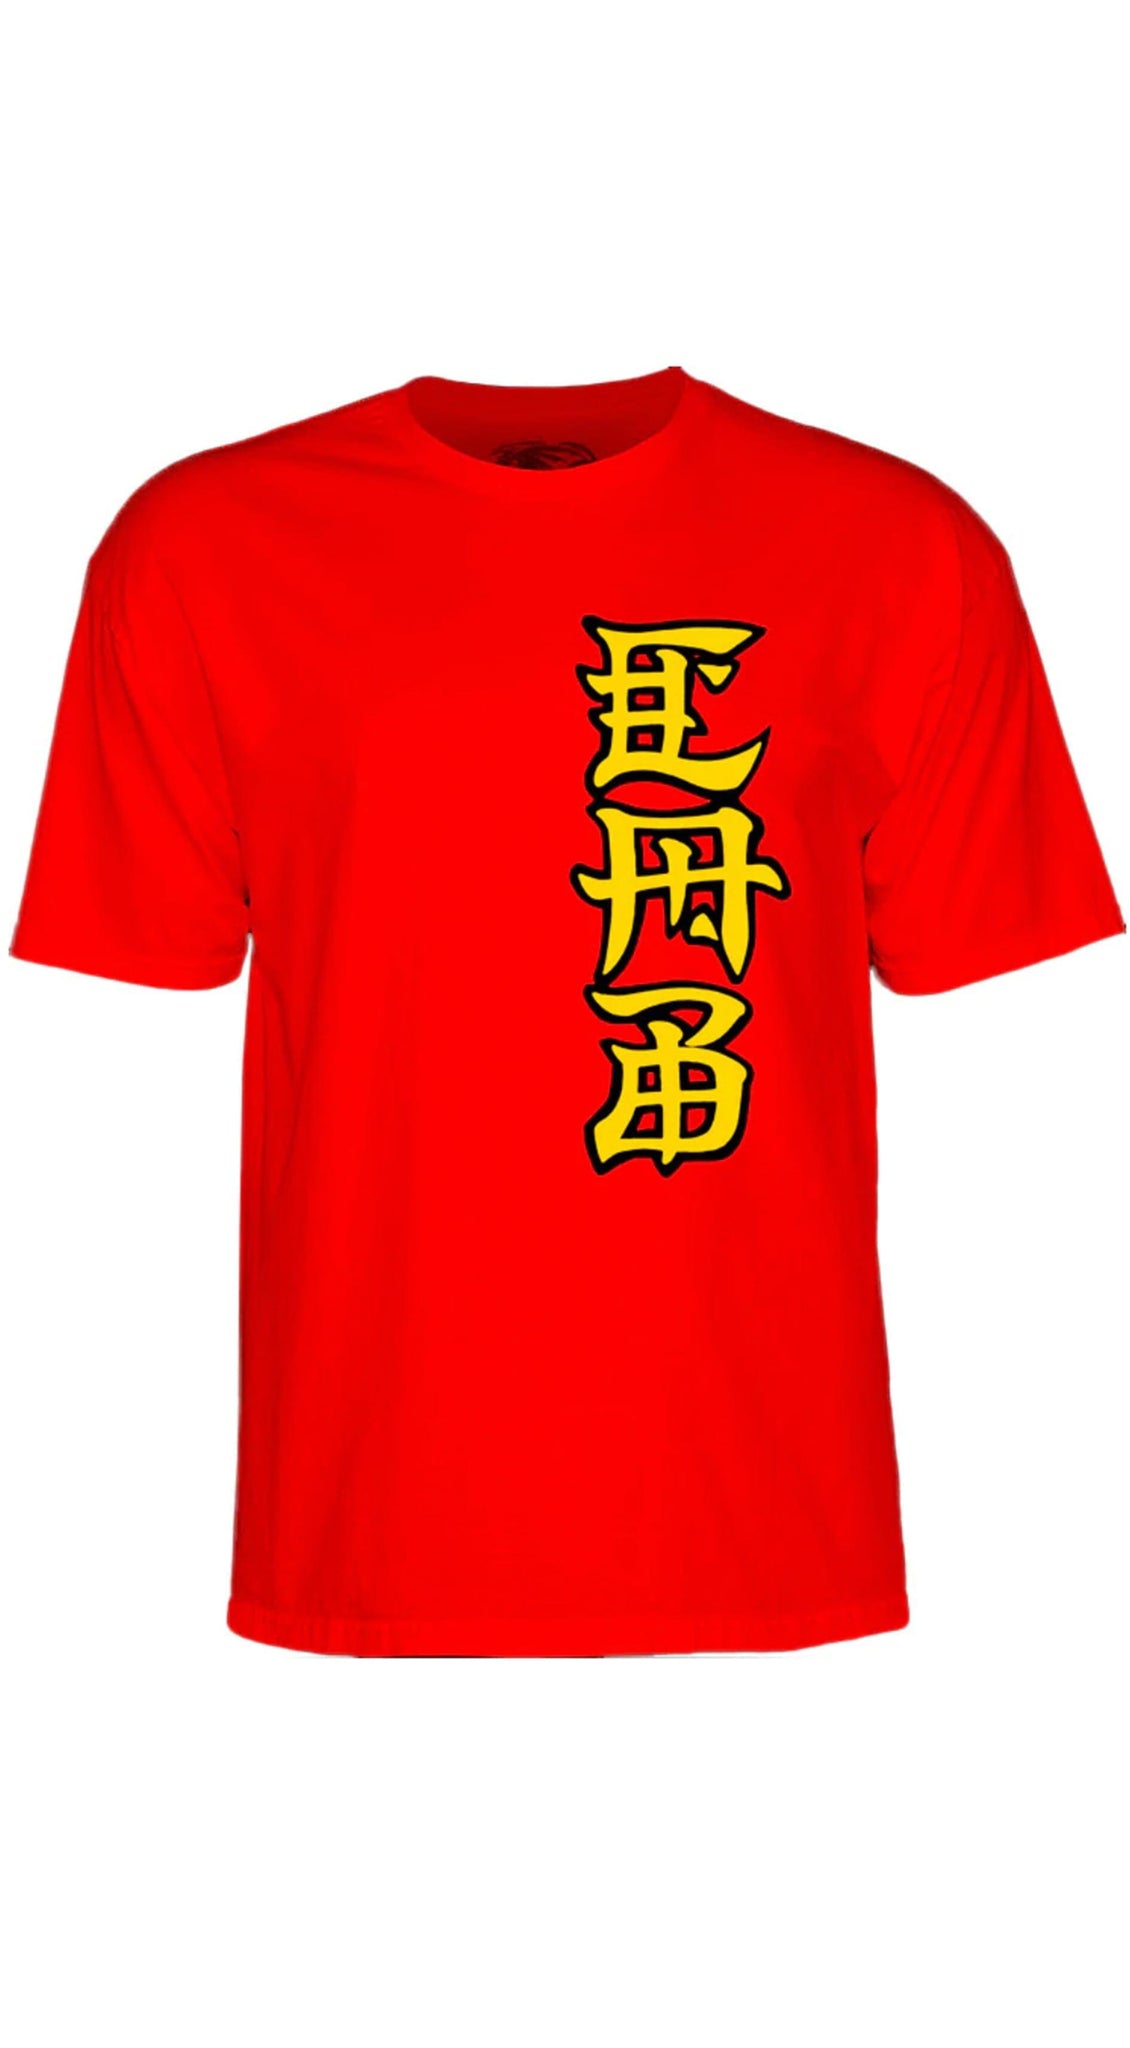 POWELL PERALTA Caballero Ban This T-Shirt Red- Camiseta Ropa Powell Peralta 